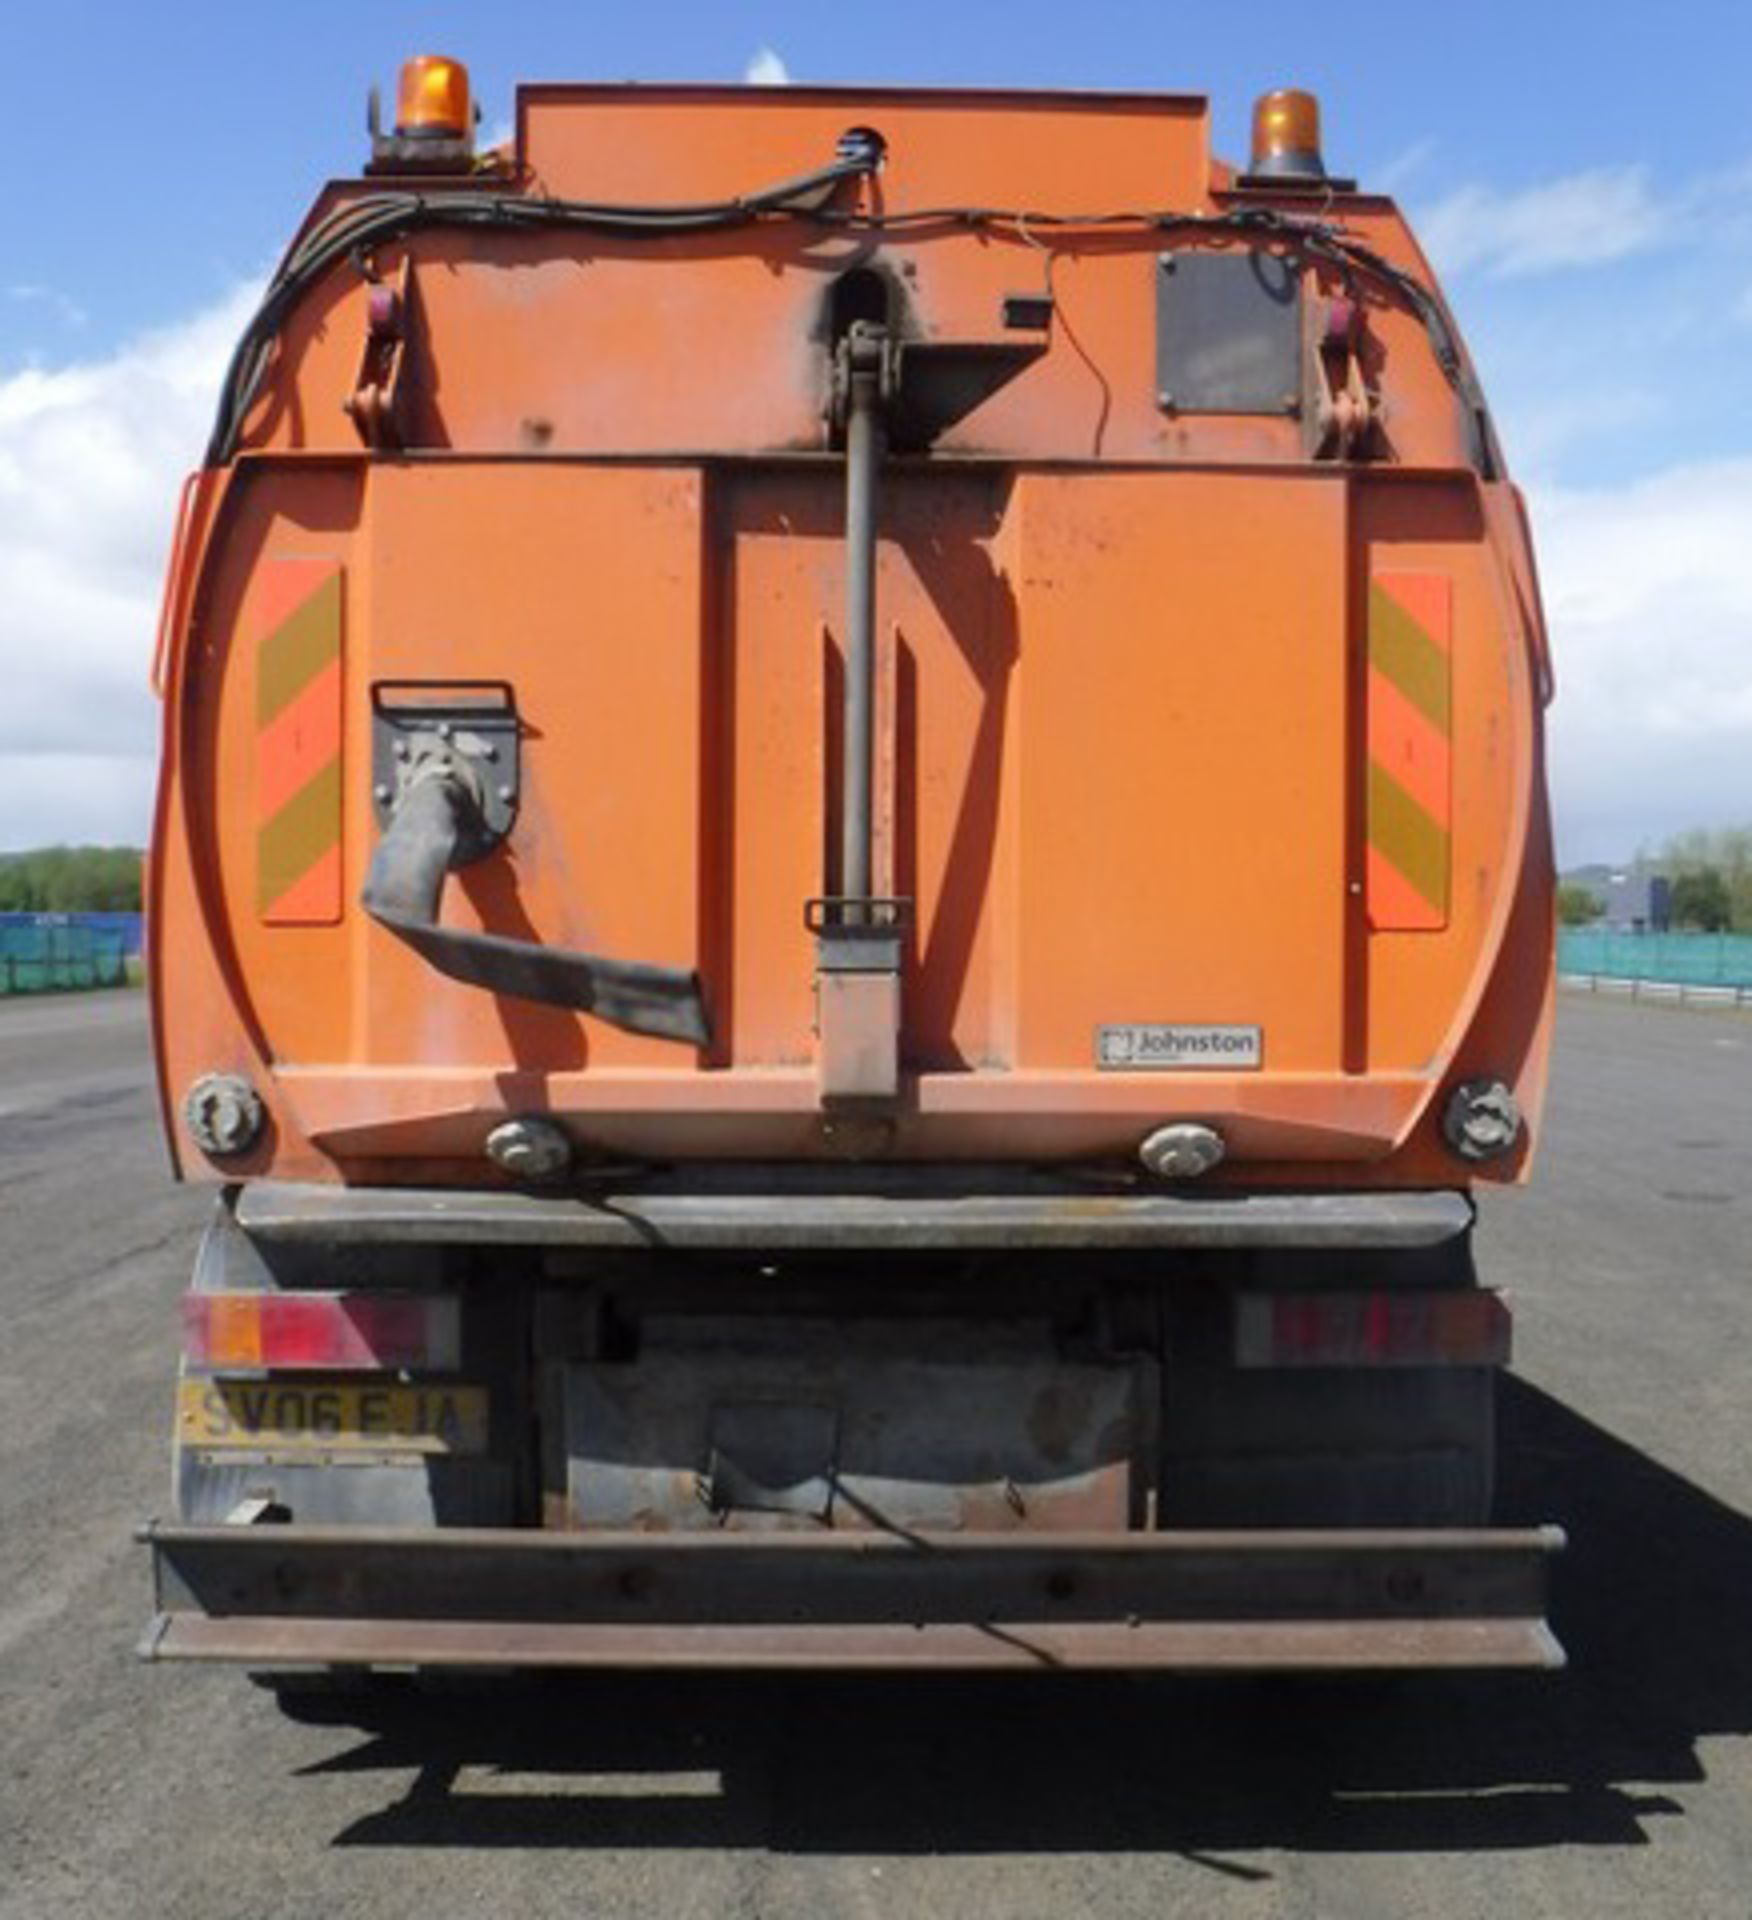 IVECO Johnson Sweeper - 5880cc - Image 18 of 21